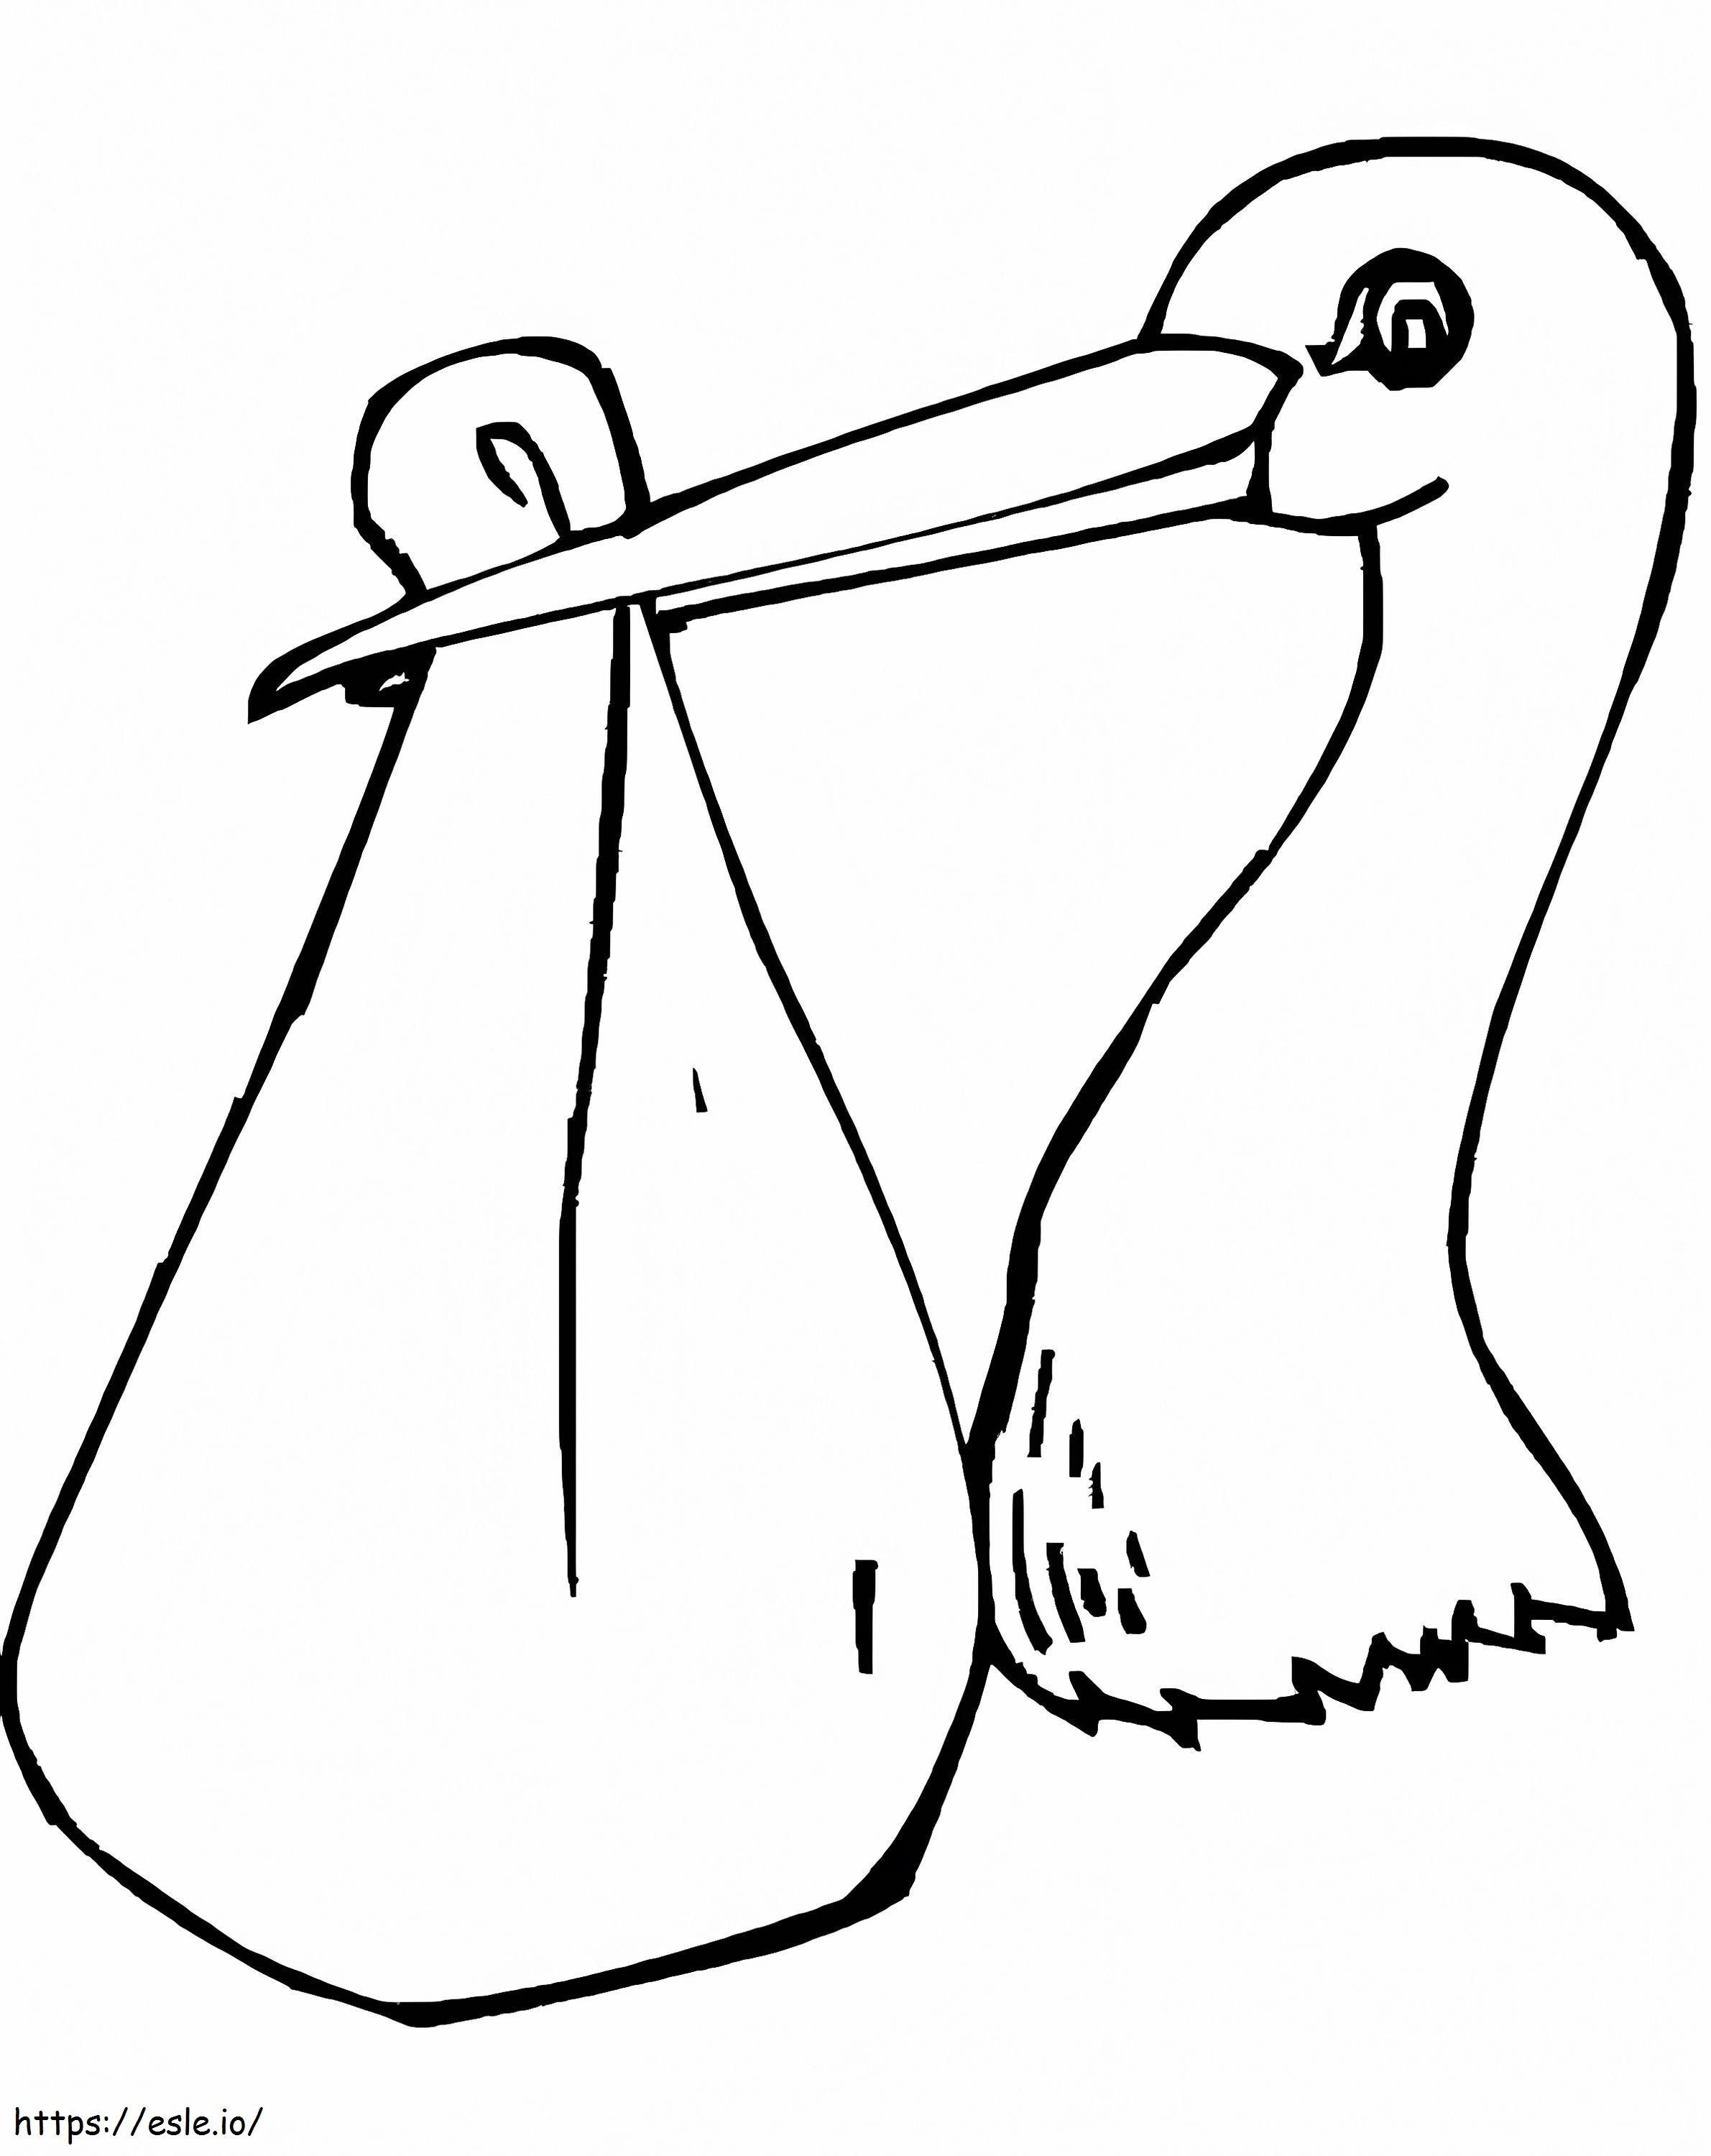 Stork 2 coloring page